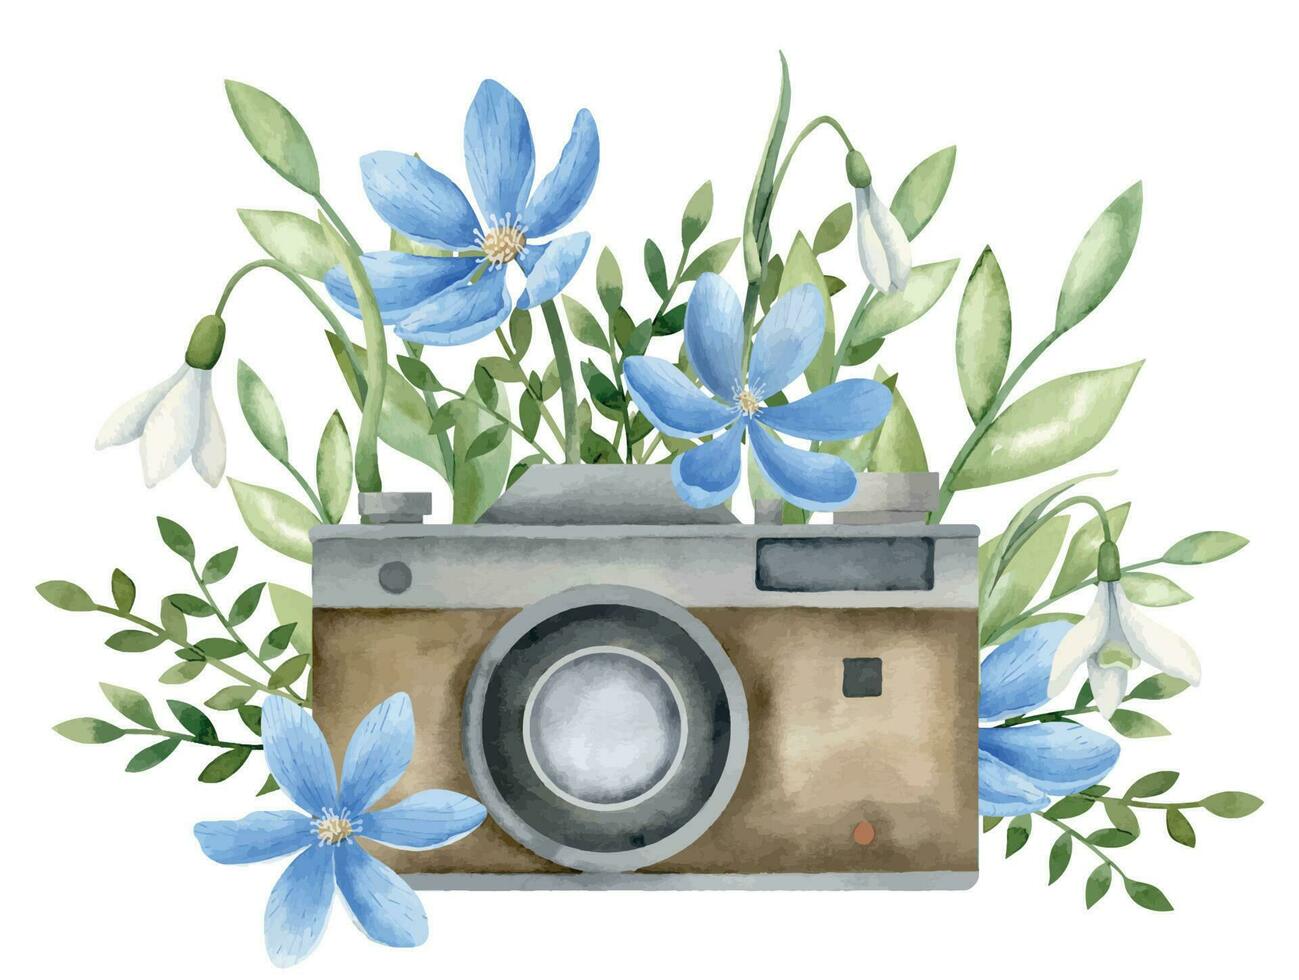 Vintage Camera with blue Flowers. Hand drawn watercolor illustration of old retro photo equipment and forest daisy on white isolated background. Colorful drawing with wild plants for icon or logo vector